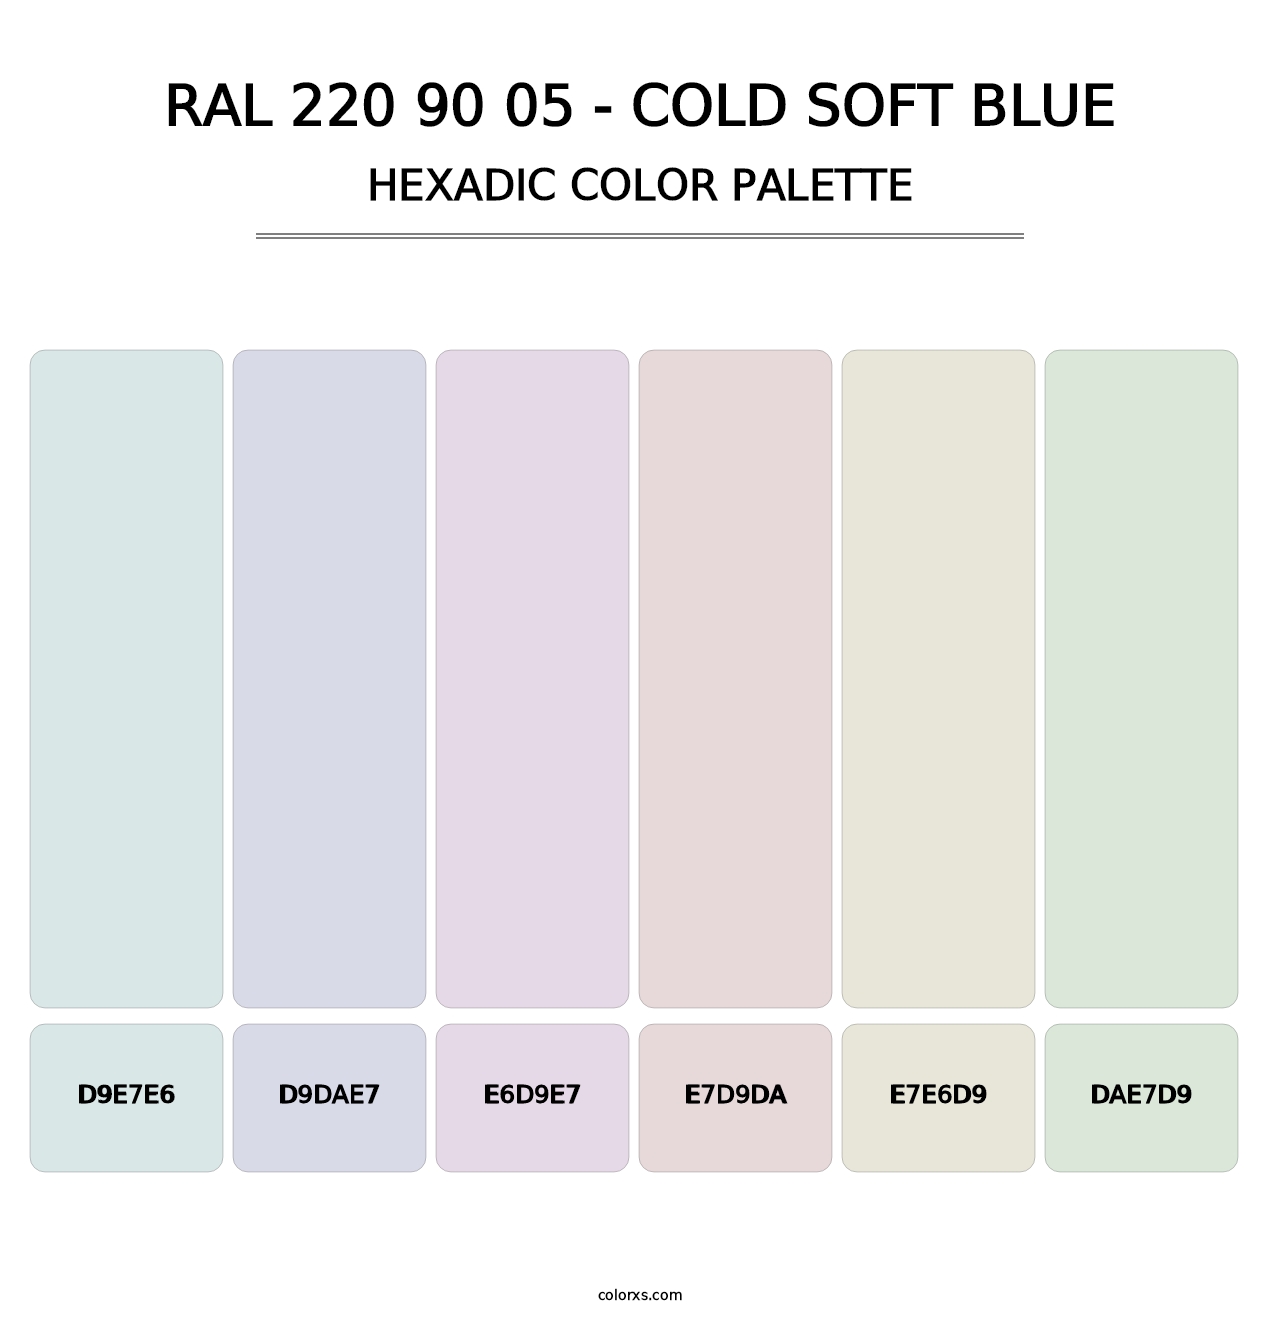 RAL 220 90 05 - Cold Soft Blue - Hexadic Color Palette